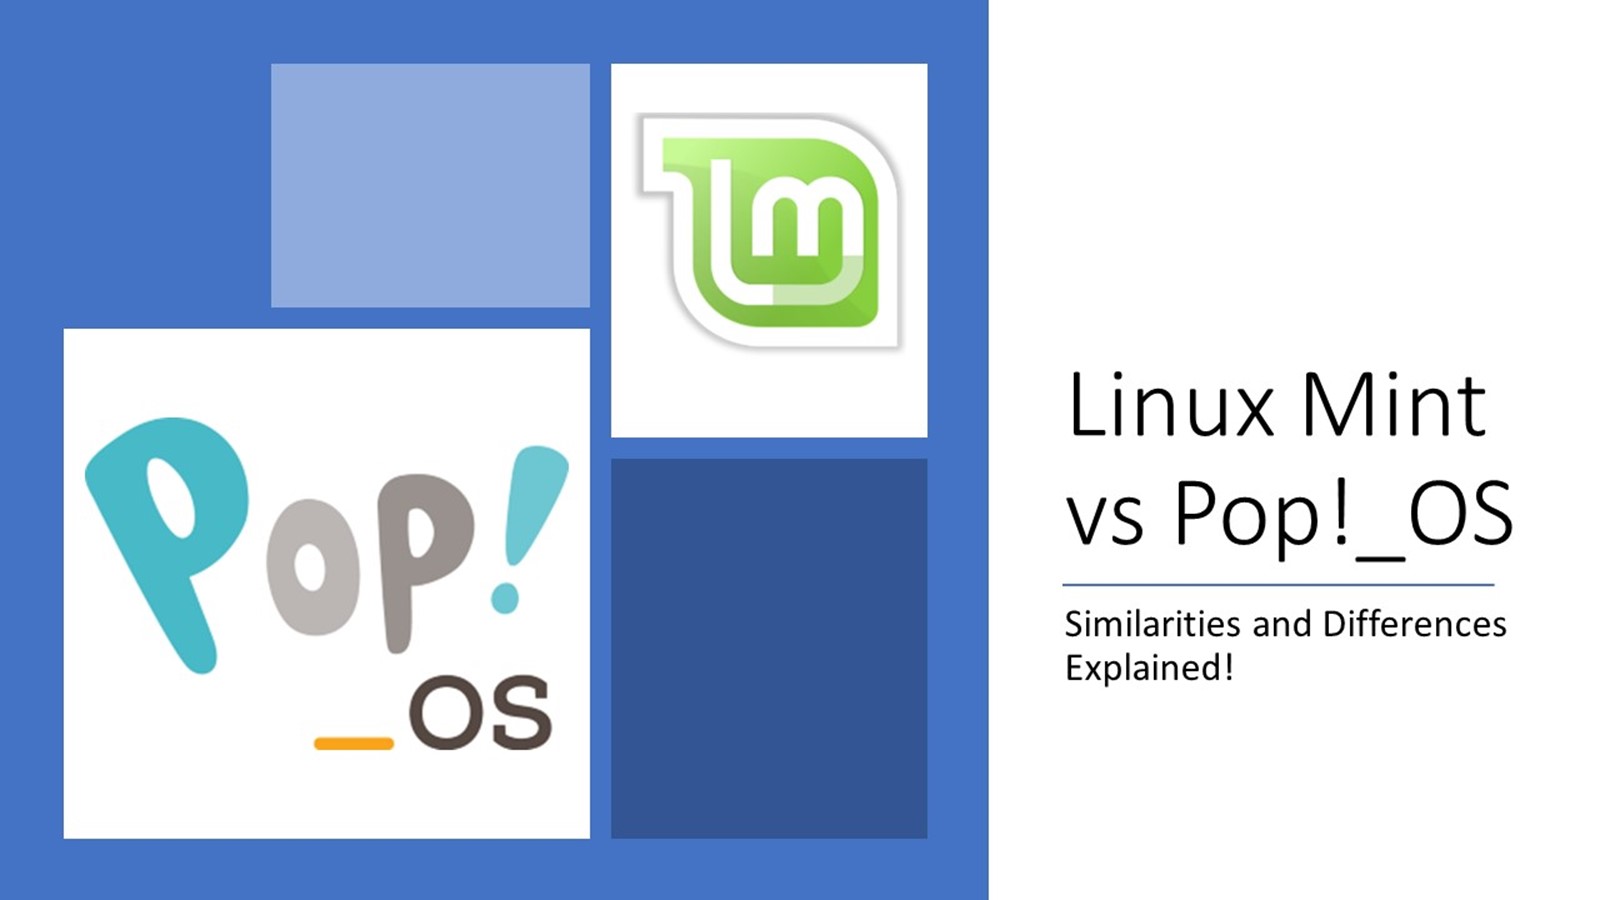 Linux Mint vs Pop!_OS: Similarities & Differences!